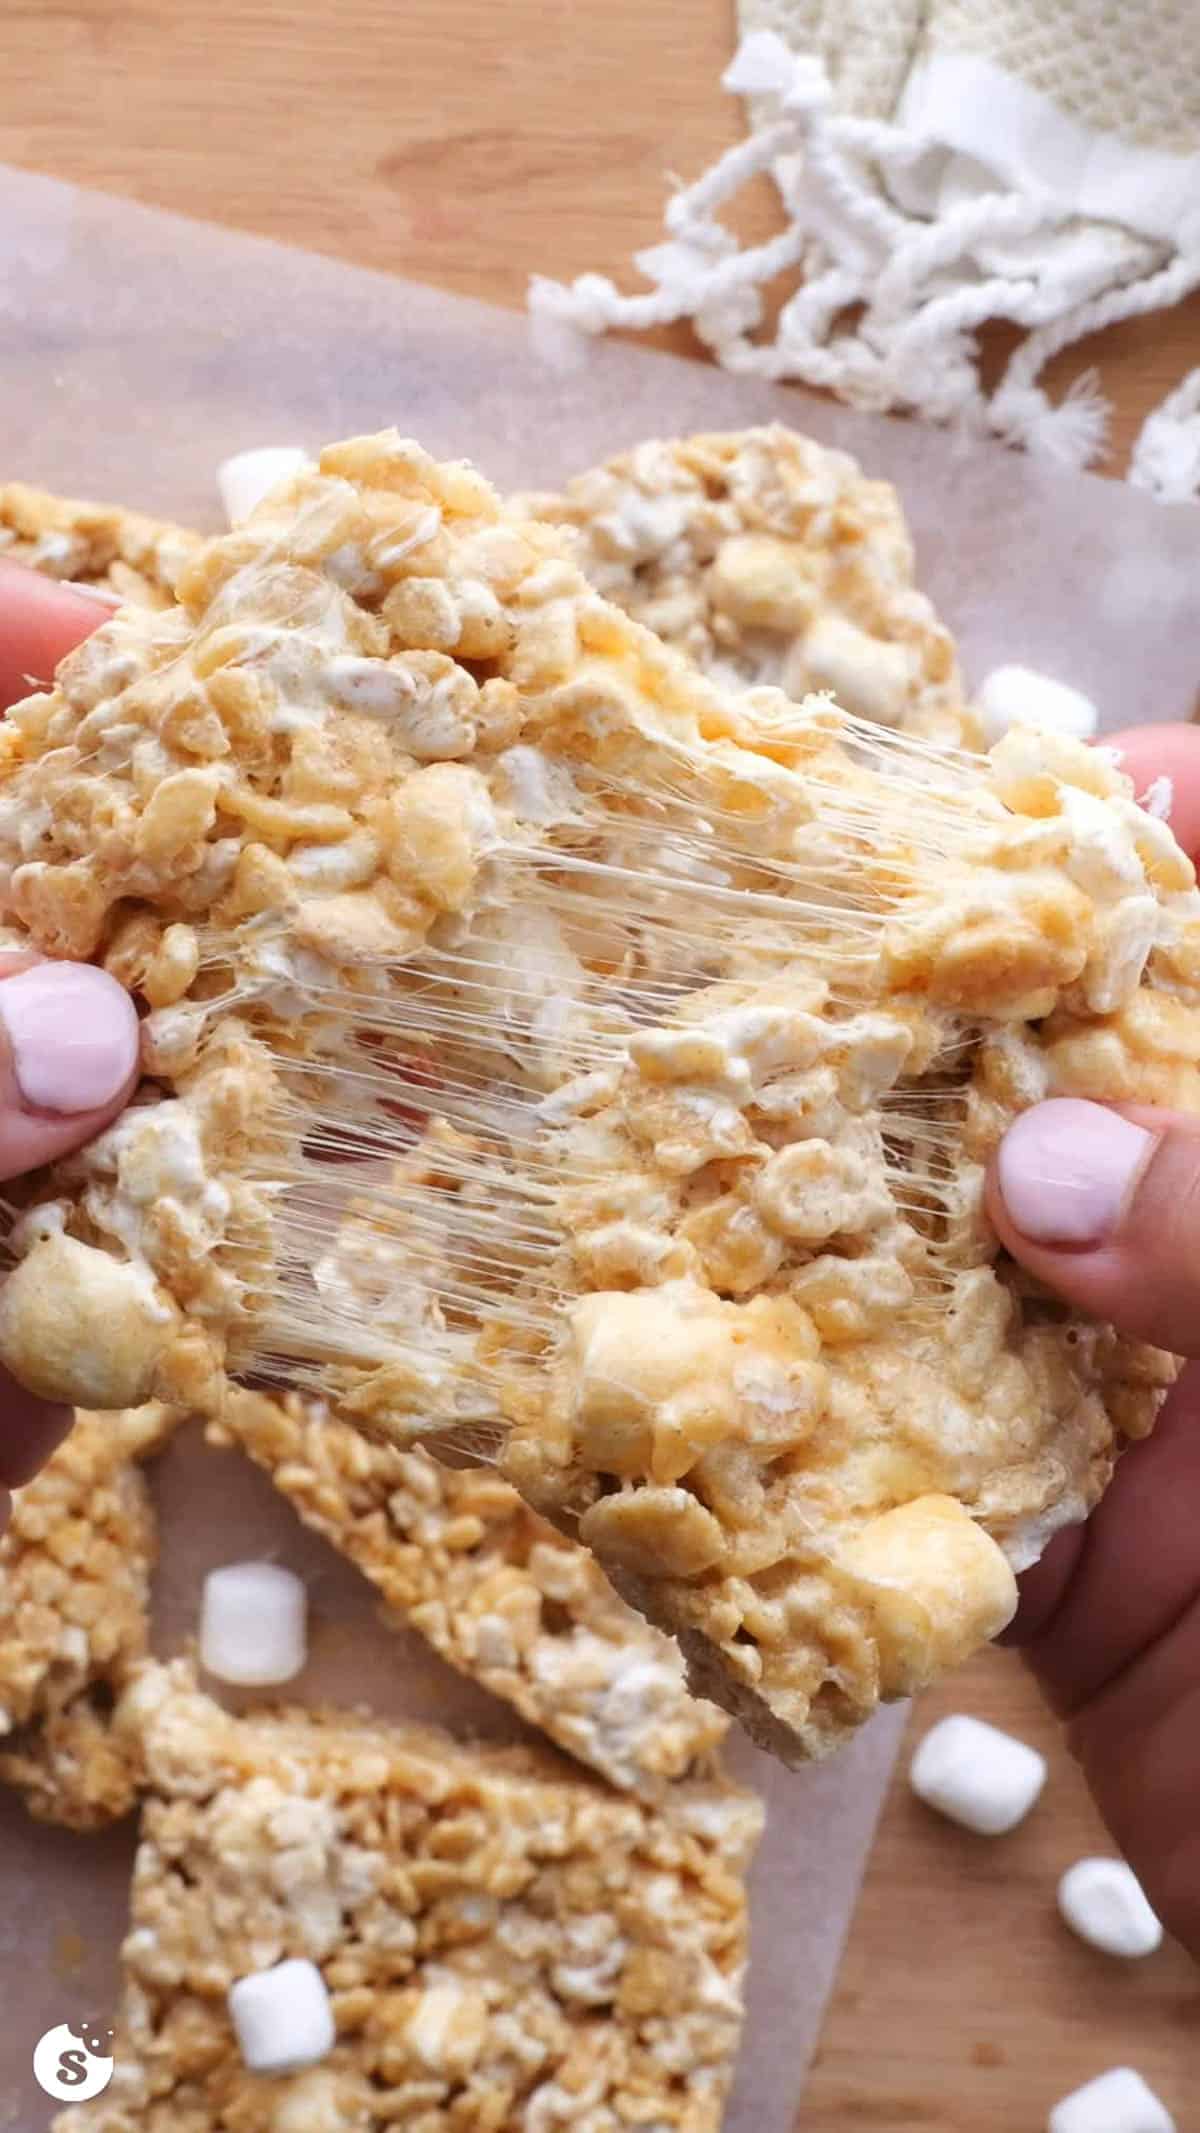 A big bar of fluffernutter rice krispie treats being pulled apart to show the gooey marshmallows